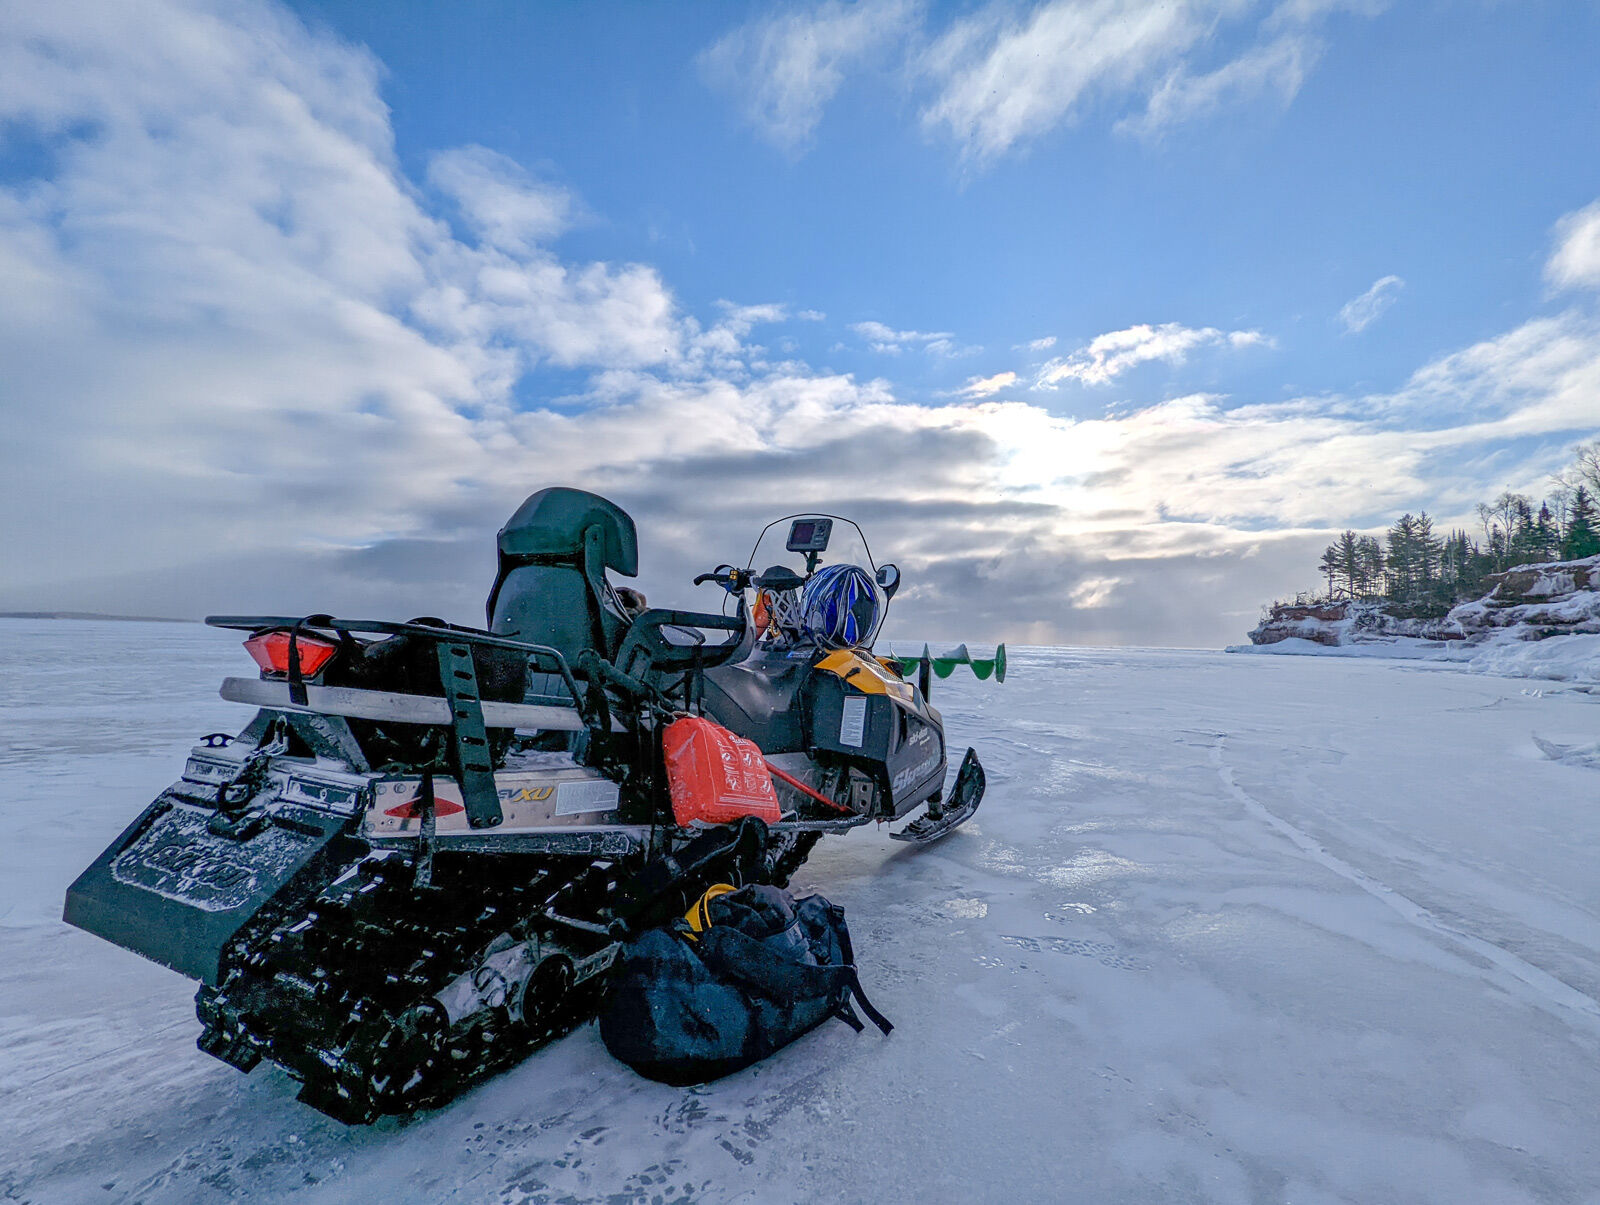 snowmobile with nebulous inflatable raft and safety gear on stockton island in the apostles